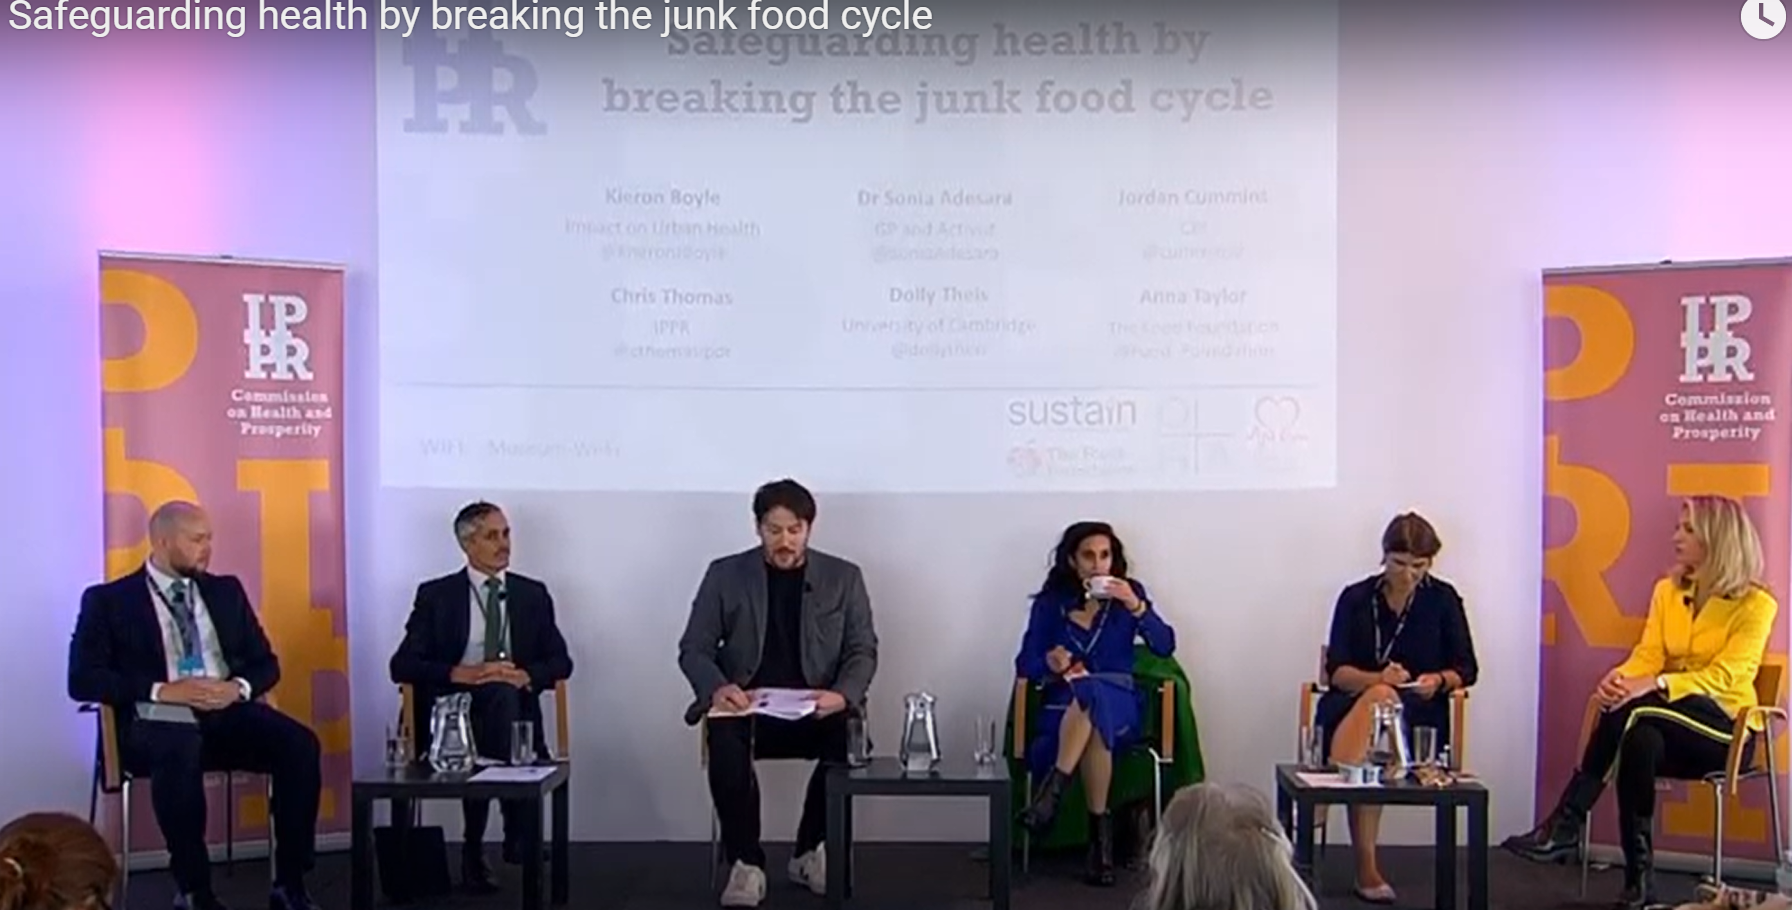 Safeguarding health by breaking the junk food cycle event